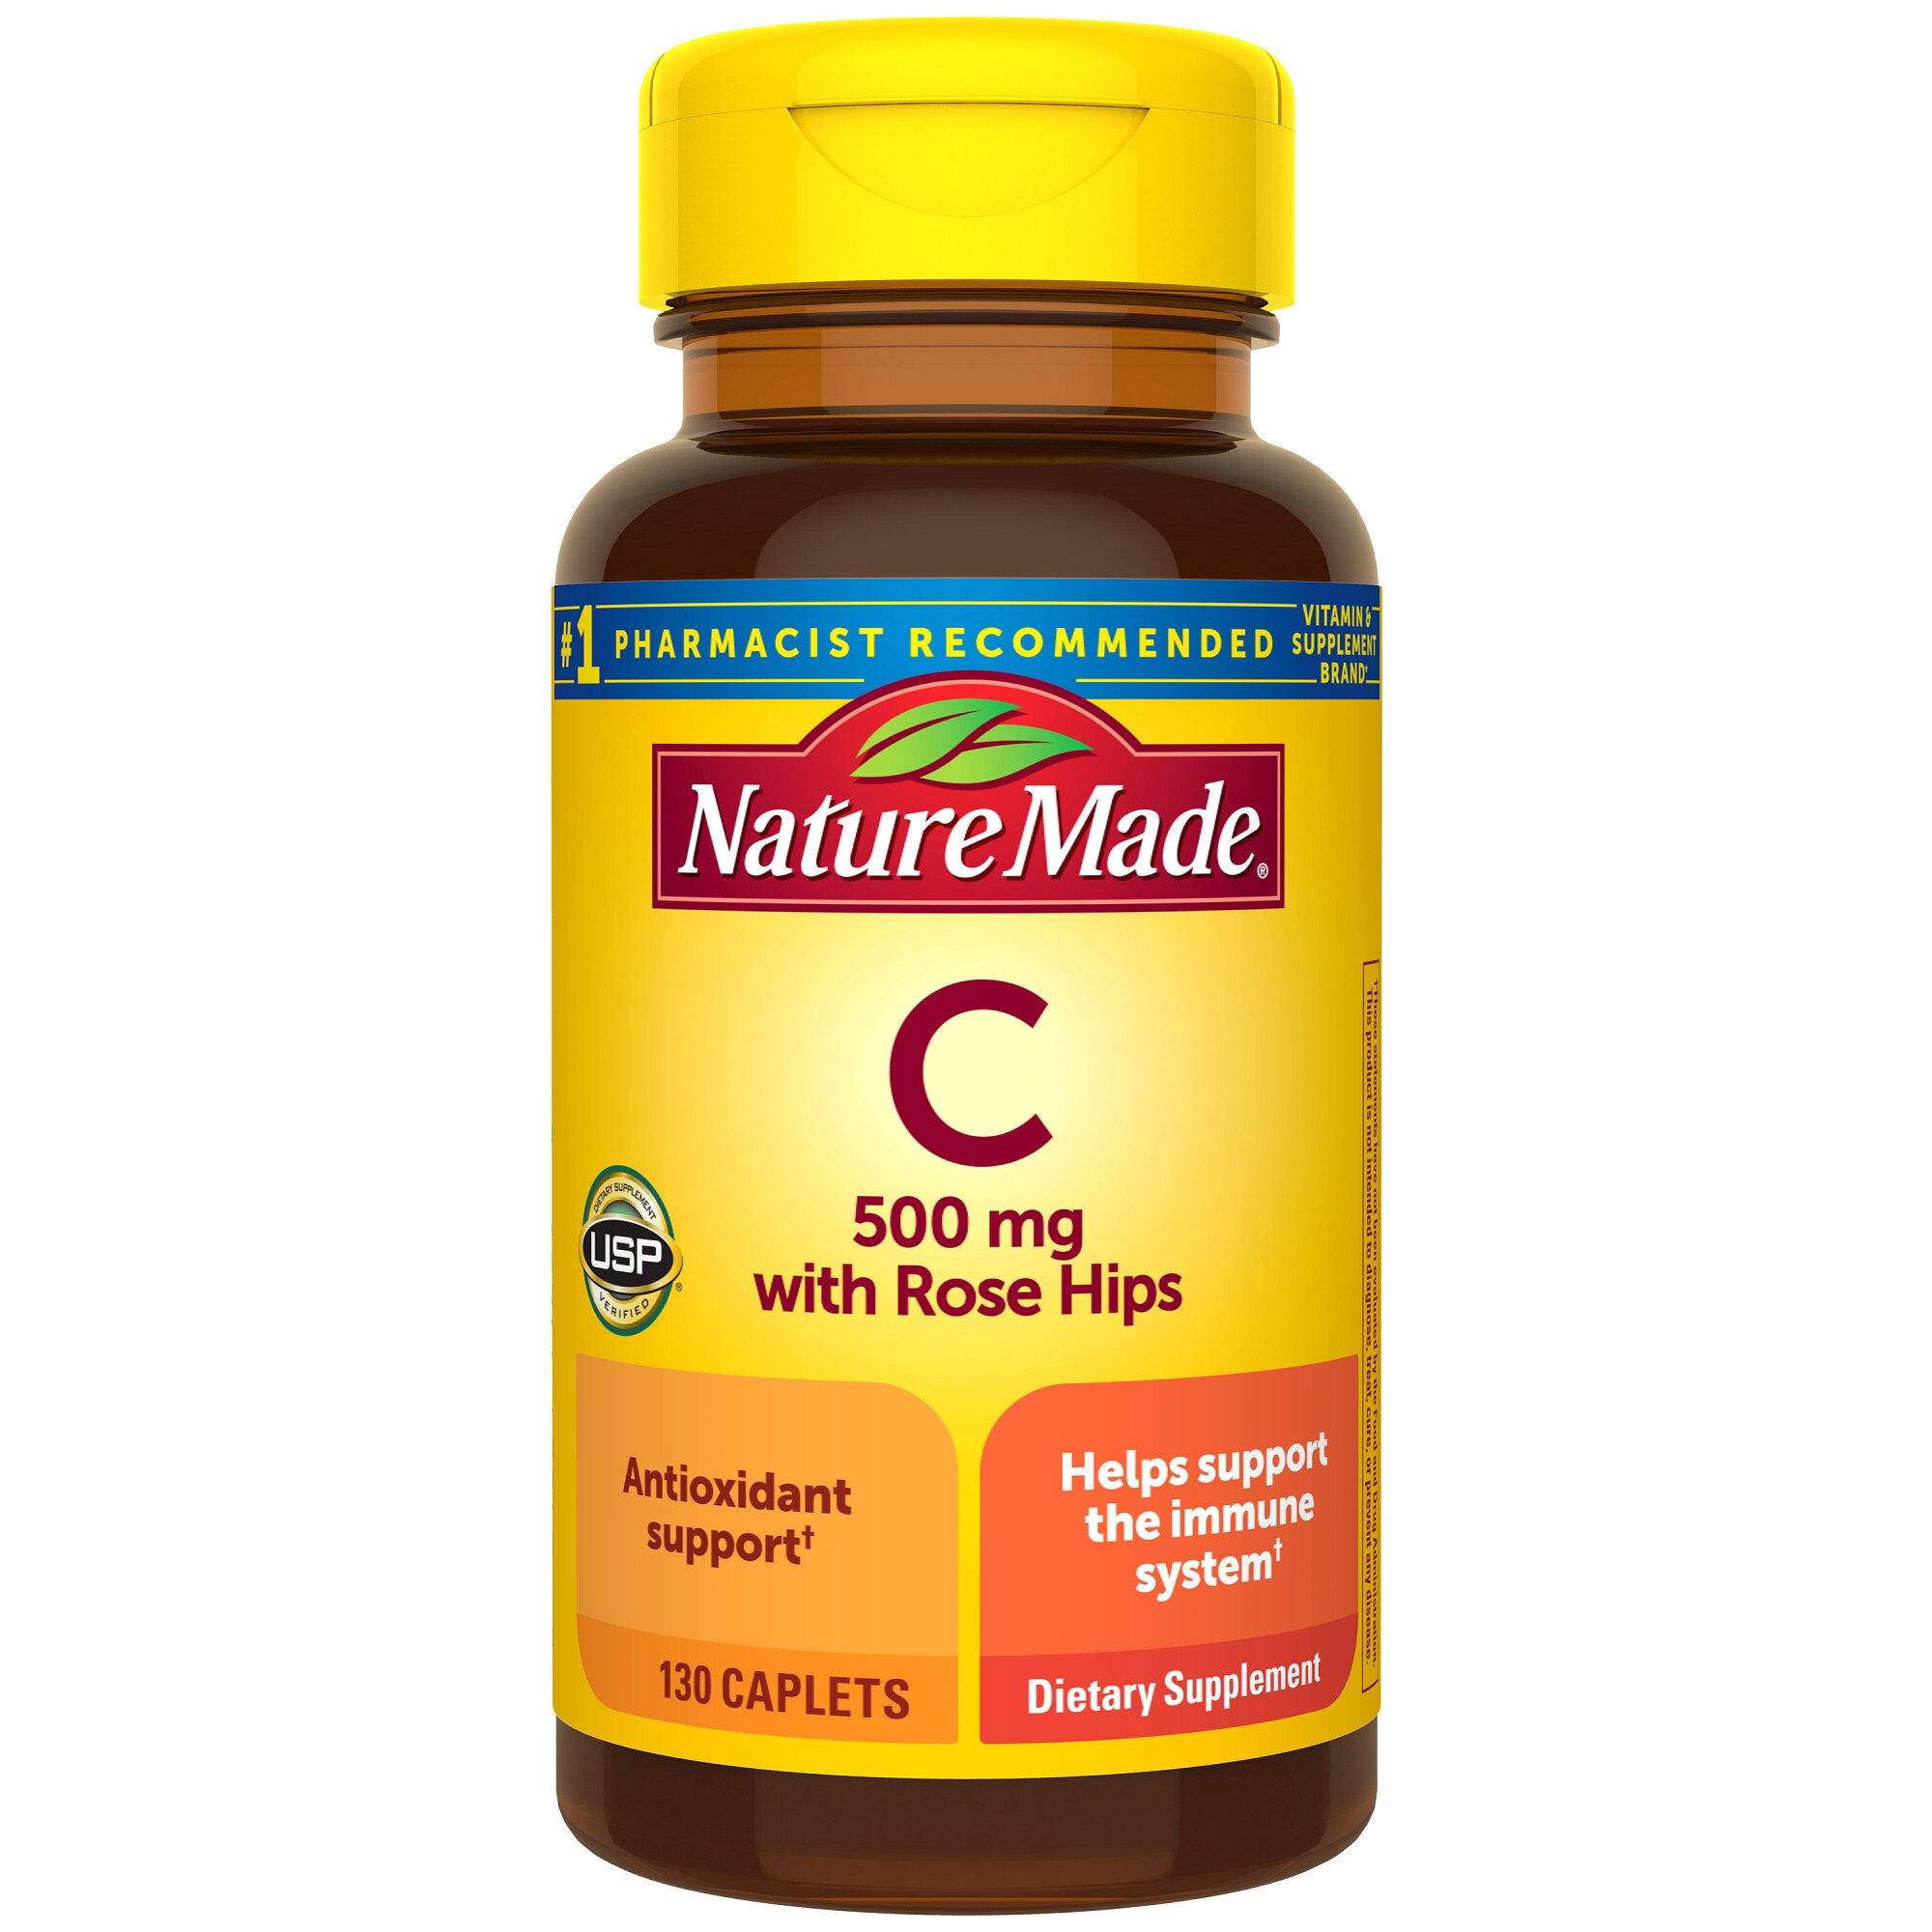 Nature Made Vitamin C 500 Mg With Rose Hips Caplets, 130 Ct , CVS